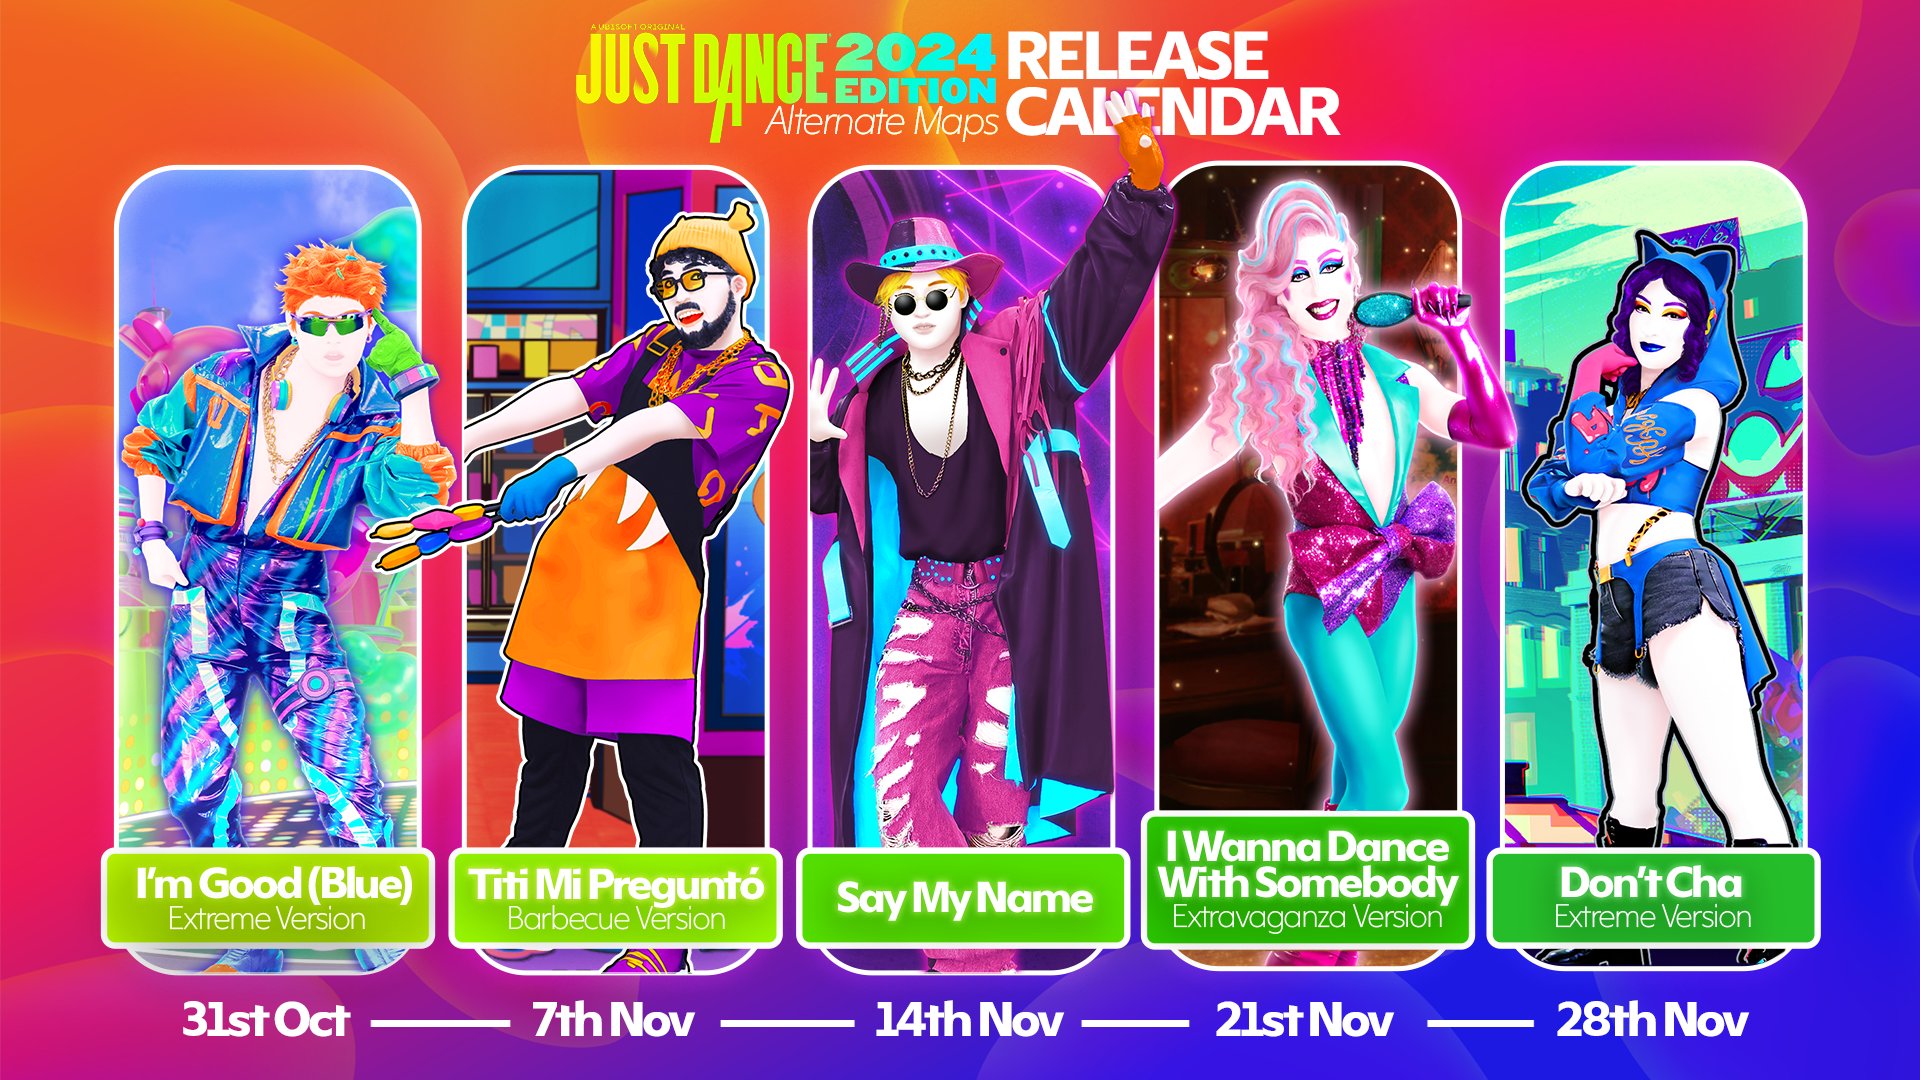 Just Dance 2024 Edition on X: Surprise, icons! You've got 5 new maps  coming your way over the next few weeks - soak it up! Check out the  previews here 👇